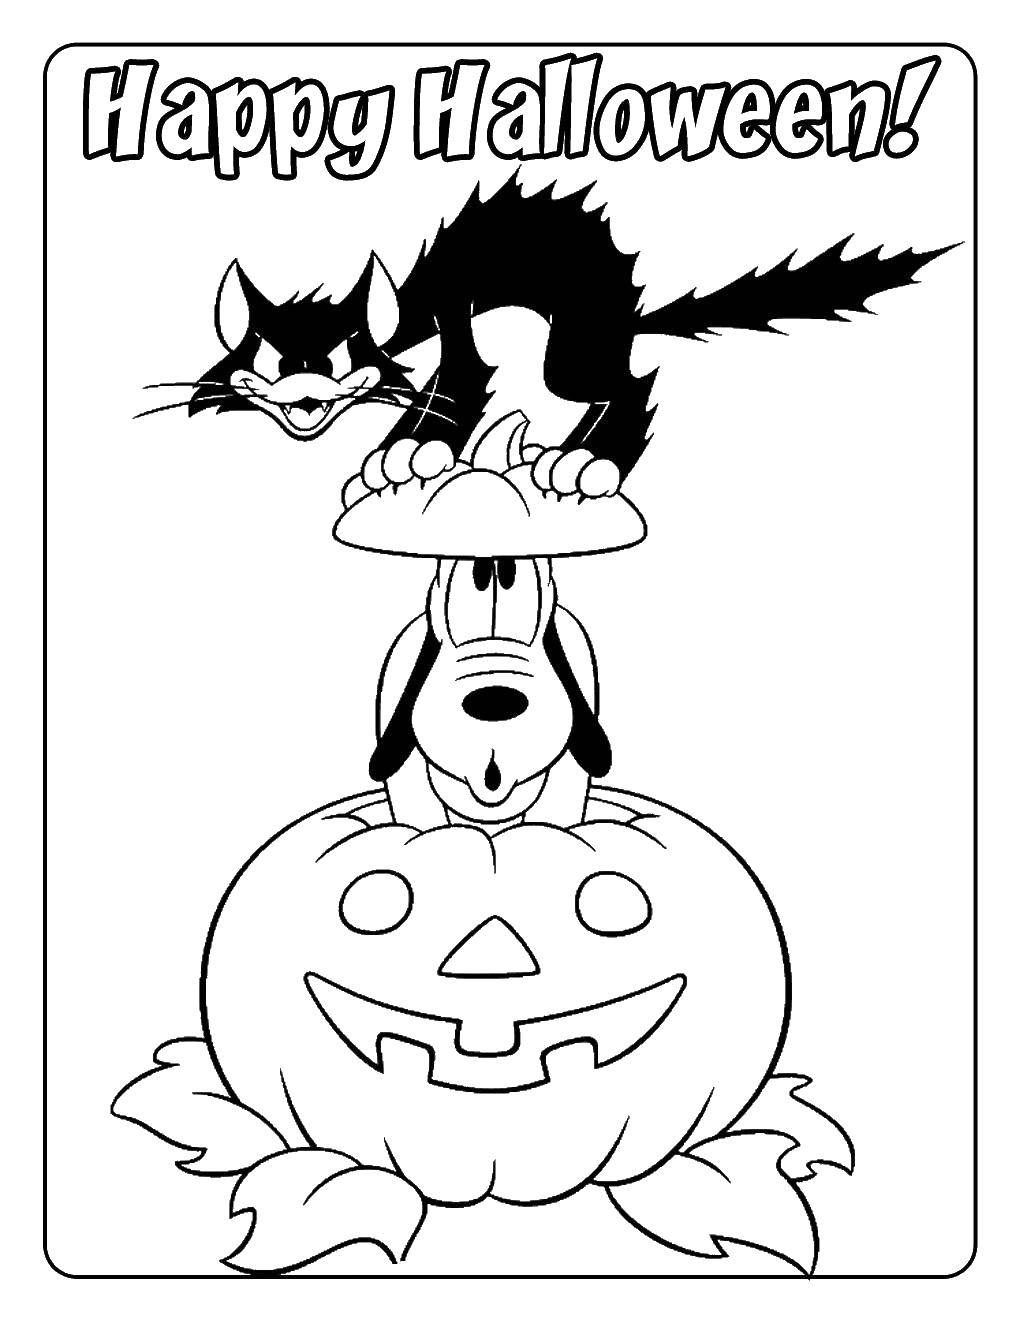 Coloring Pluto and cat in Halloween. Category Halloween. Tags:  Halloween, Pluto, cat.